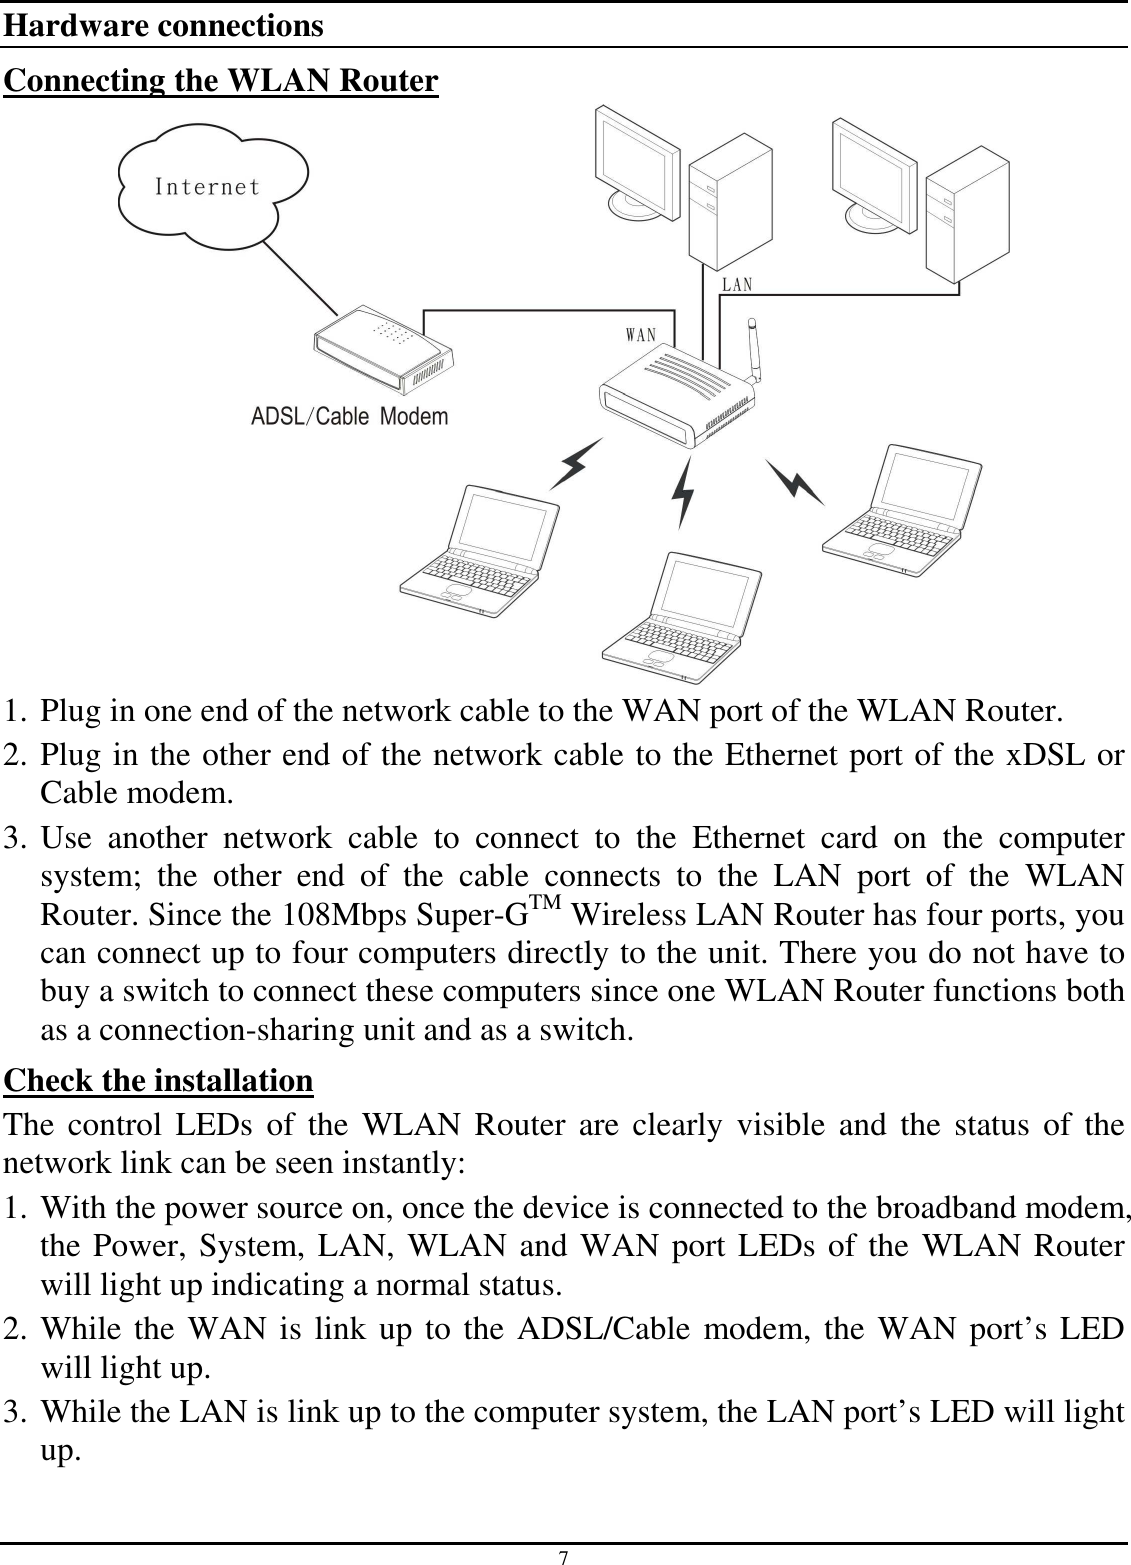 7 Hardware connections Connecting the WLAN Router  1. Plug in one end of the network cable to the WAN port of the WLAN Router. 2. Plug in the other end of the network cable to the Ethernet port of the xDSL or Cable modem. 3. Use  another  network  cable  to  connect  to  the  Ethernet  card  on  the  computer system;  the  other  end  of  the  cable  connects  to  the  LAN  port  of  the  WLAN Router. Since the 108Mbps Super-GTM Wireless LAN Router has four ports, you can connect up to four computers directly to the unit. There you do not have to buy a switch to connect these computers since one WLAN Router functions both as a connection-sharing unit and as a switch. Check the installation The  control  LEDs  of  the  WLAN  Router are  clearly  visible  and  the  status  of  the network link can be seen instantly: 1. With the power source on, once the device is connected to the broadband modem, the Power, System, LAN, WLAN and WAN port LEDs of the WLAN Router will light up indicating a normal status. 2. While the WAN is link up to the ADSL/Cable modem, the WAN port’s LED will light up. 3. While the LAN is link up to the computer system, the LAN port’s LED will light up.  